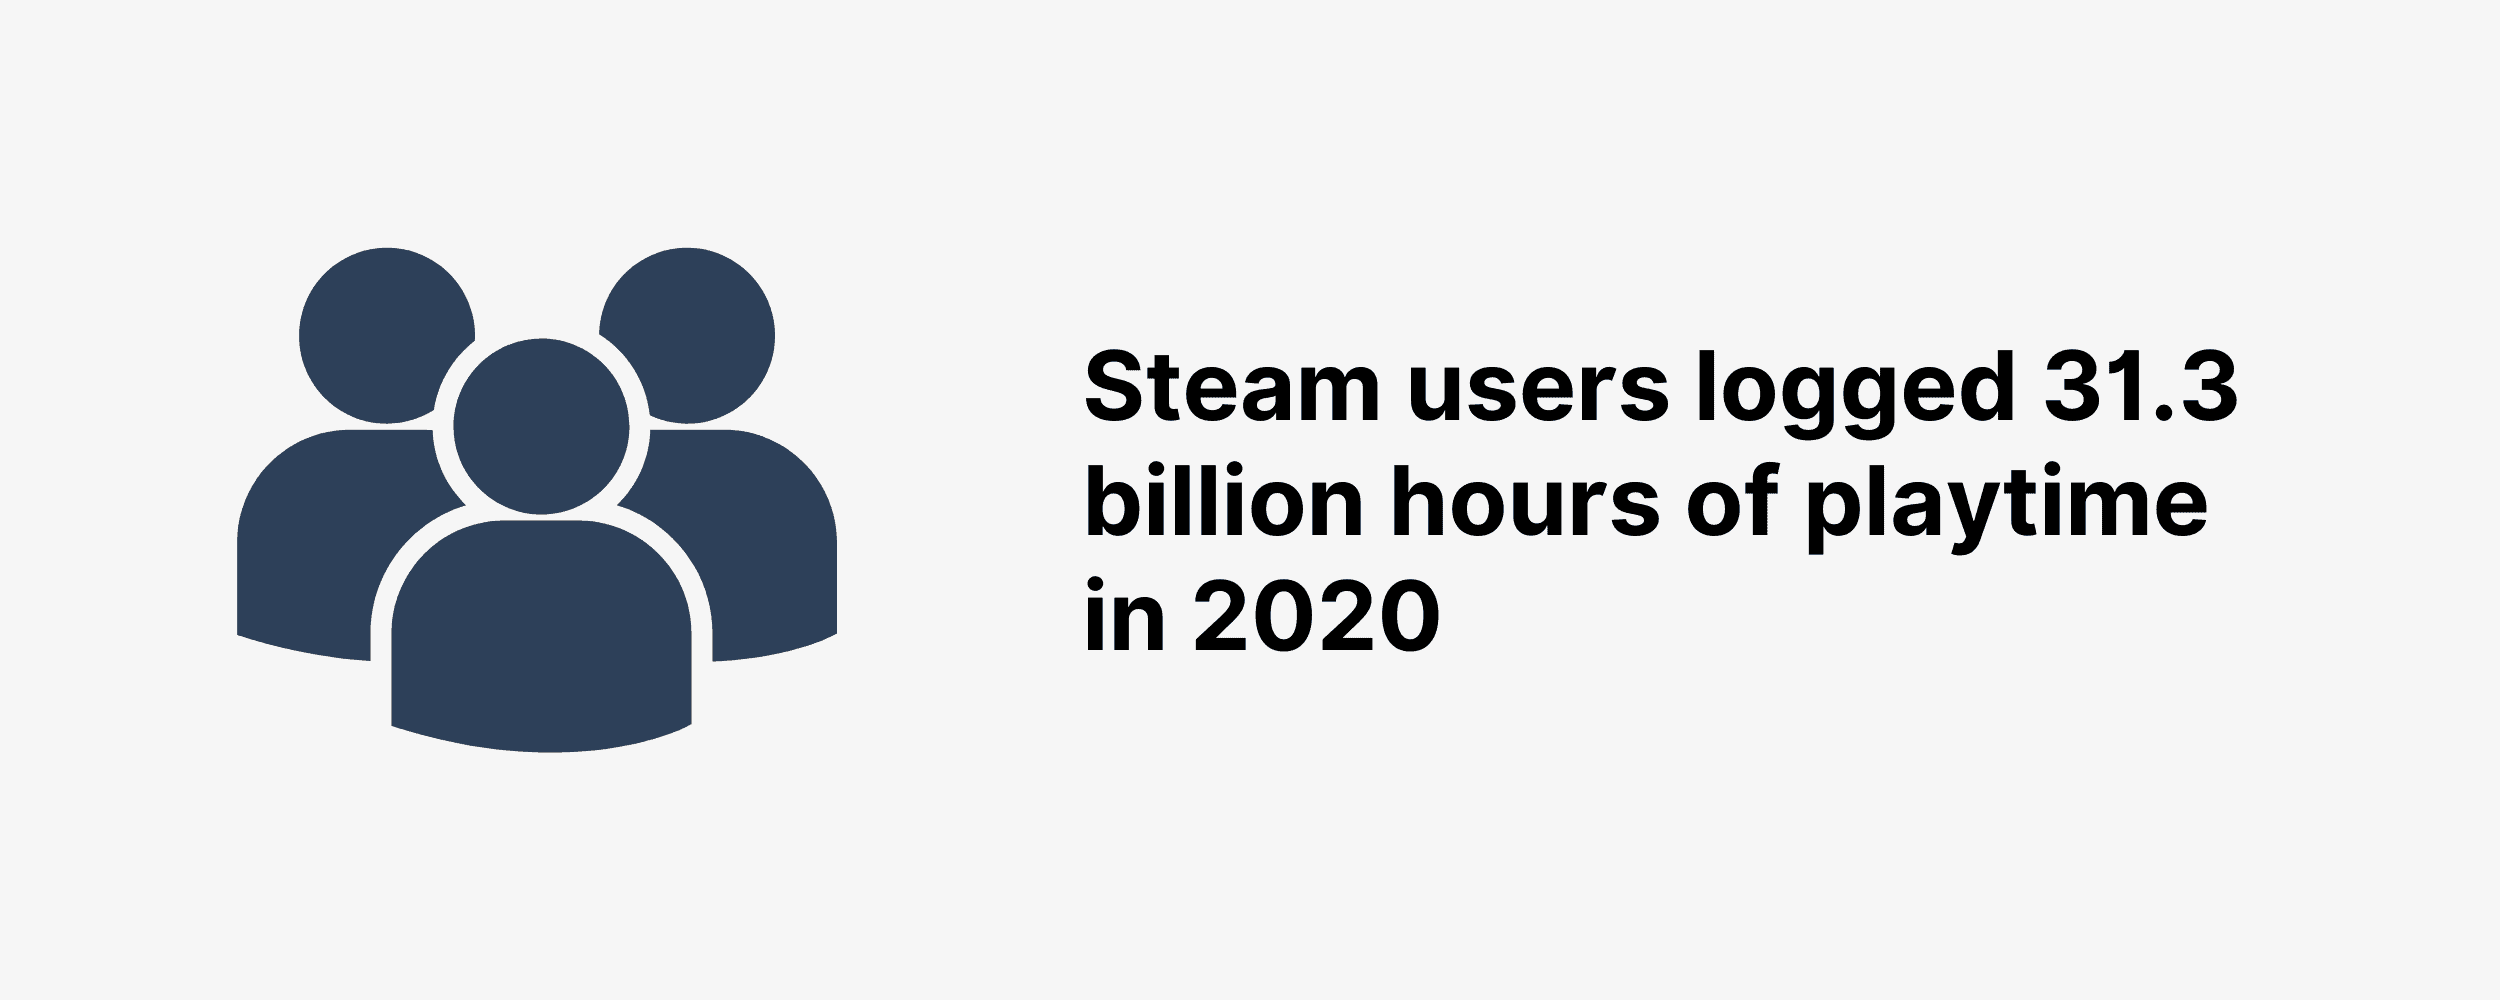 Steam users logged 31.3 billion hours of playtime in 2020